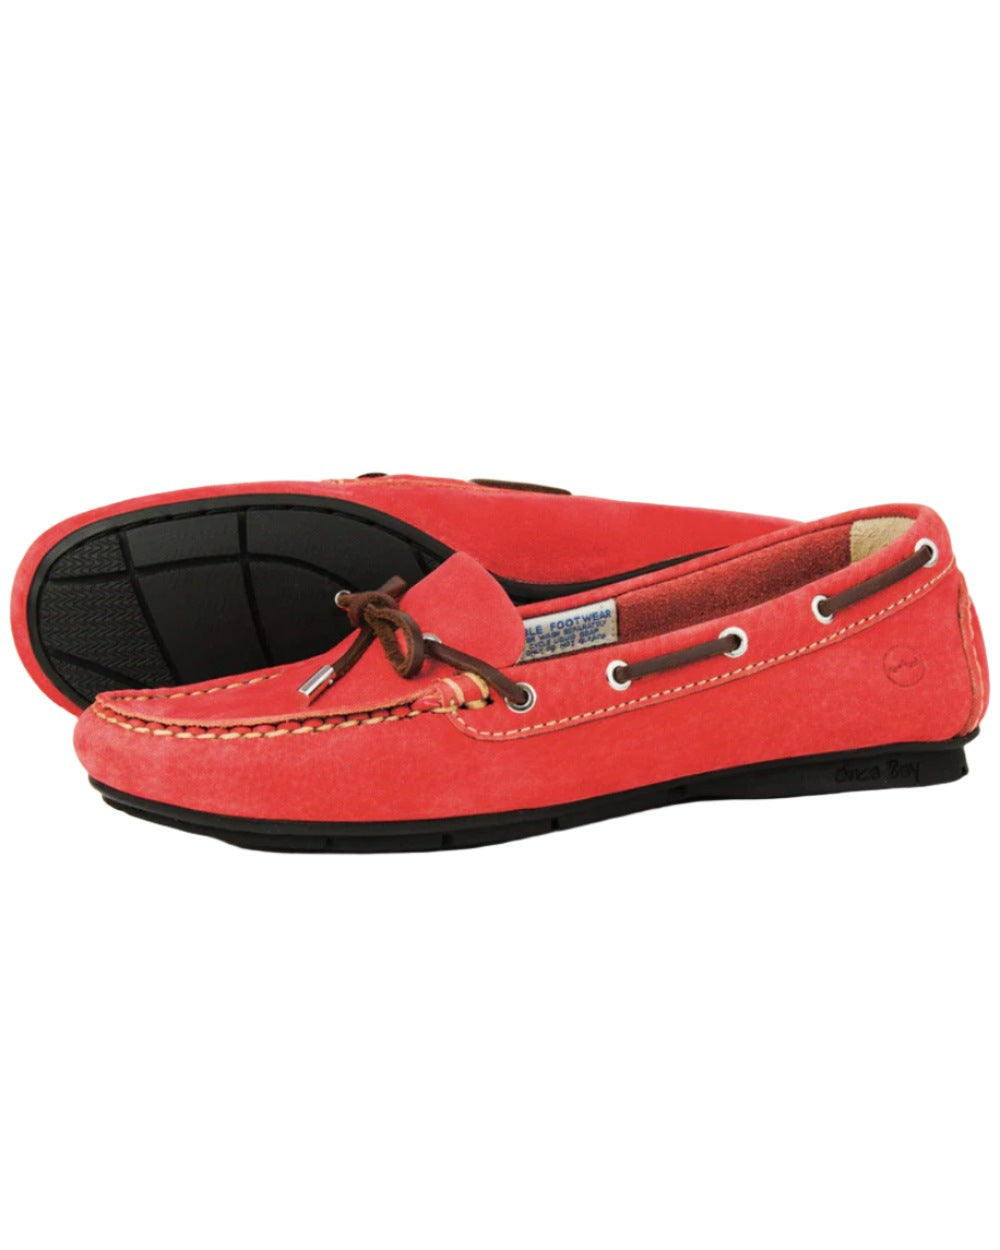 Fire Red Coloured Orca Bay Ballena Womens Loafers On A White Background 